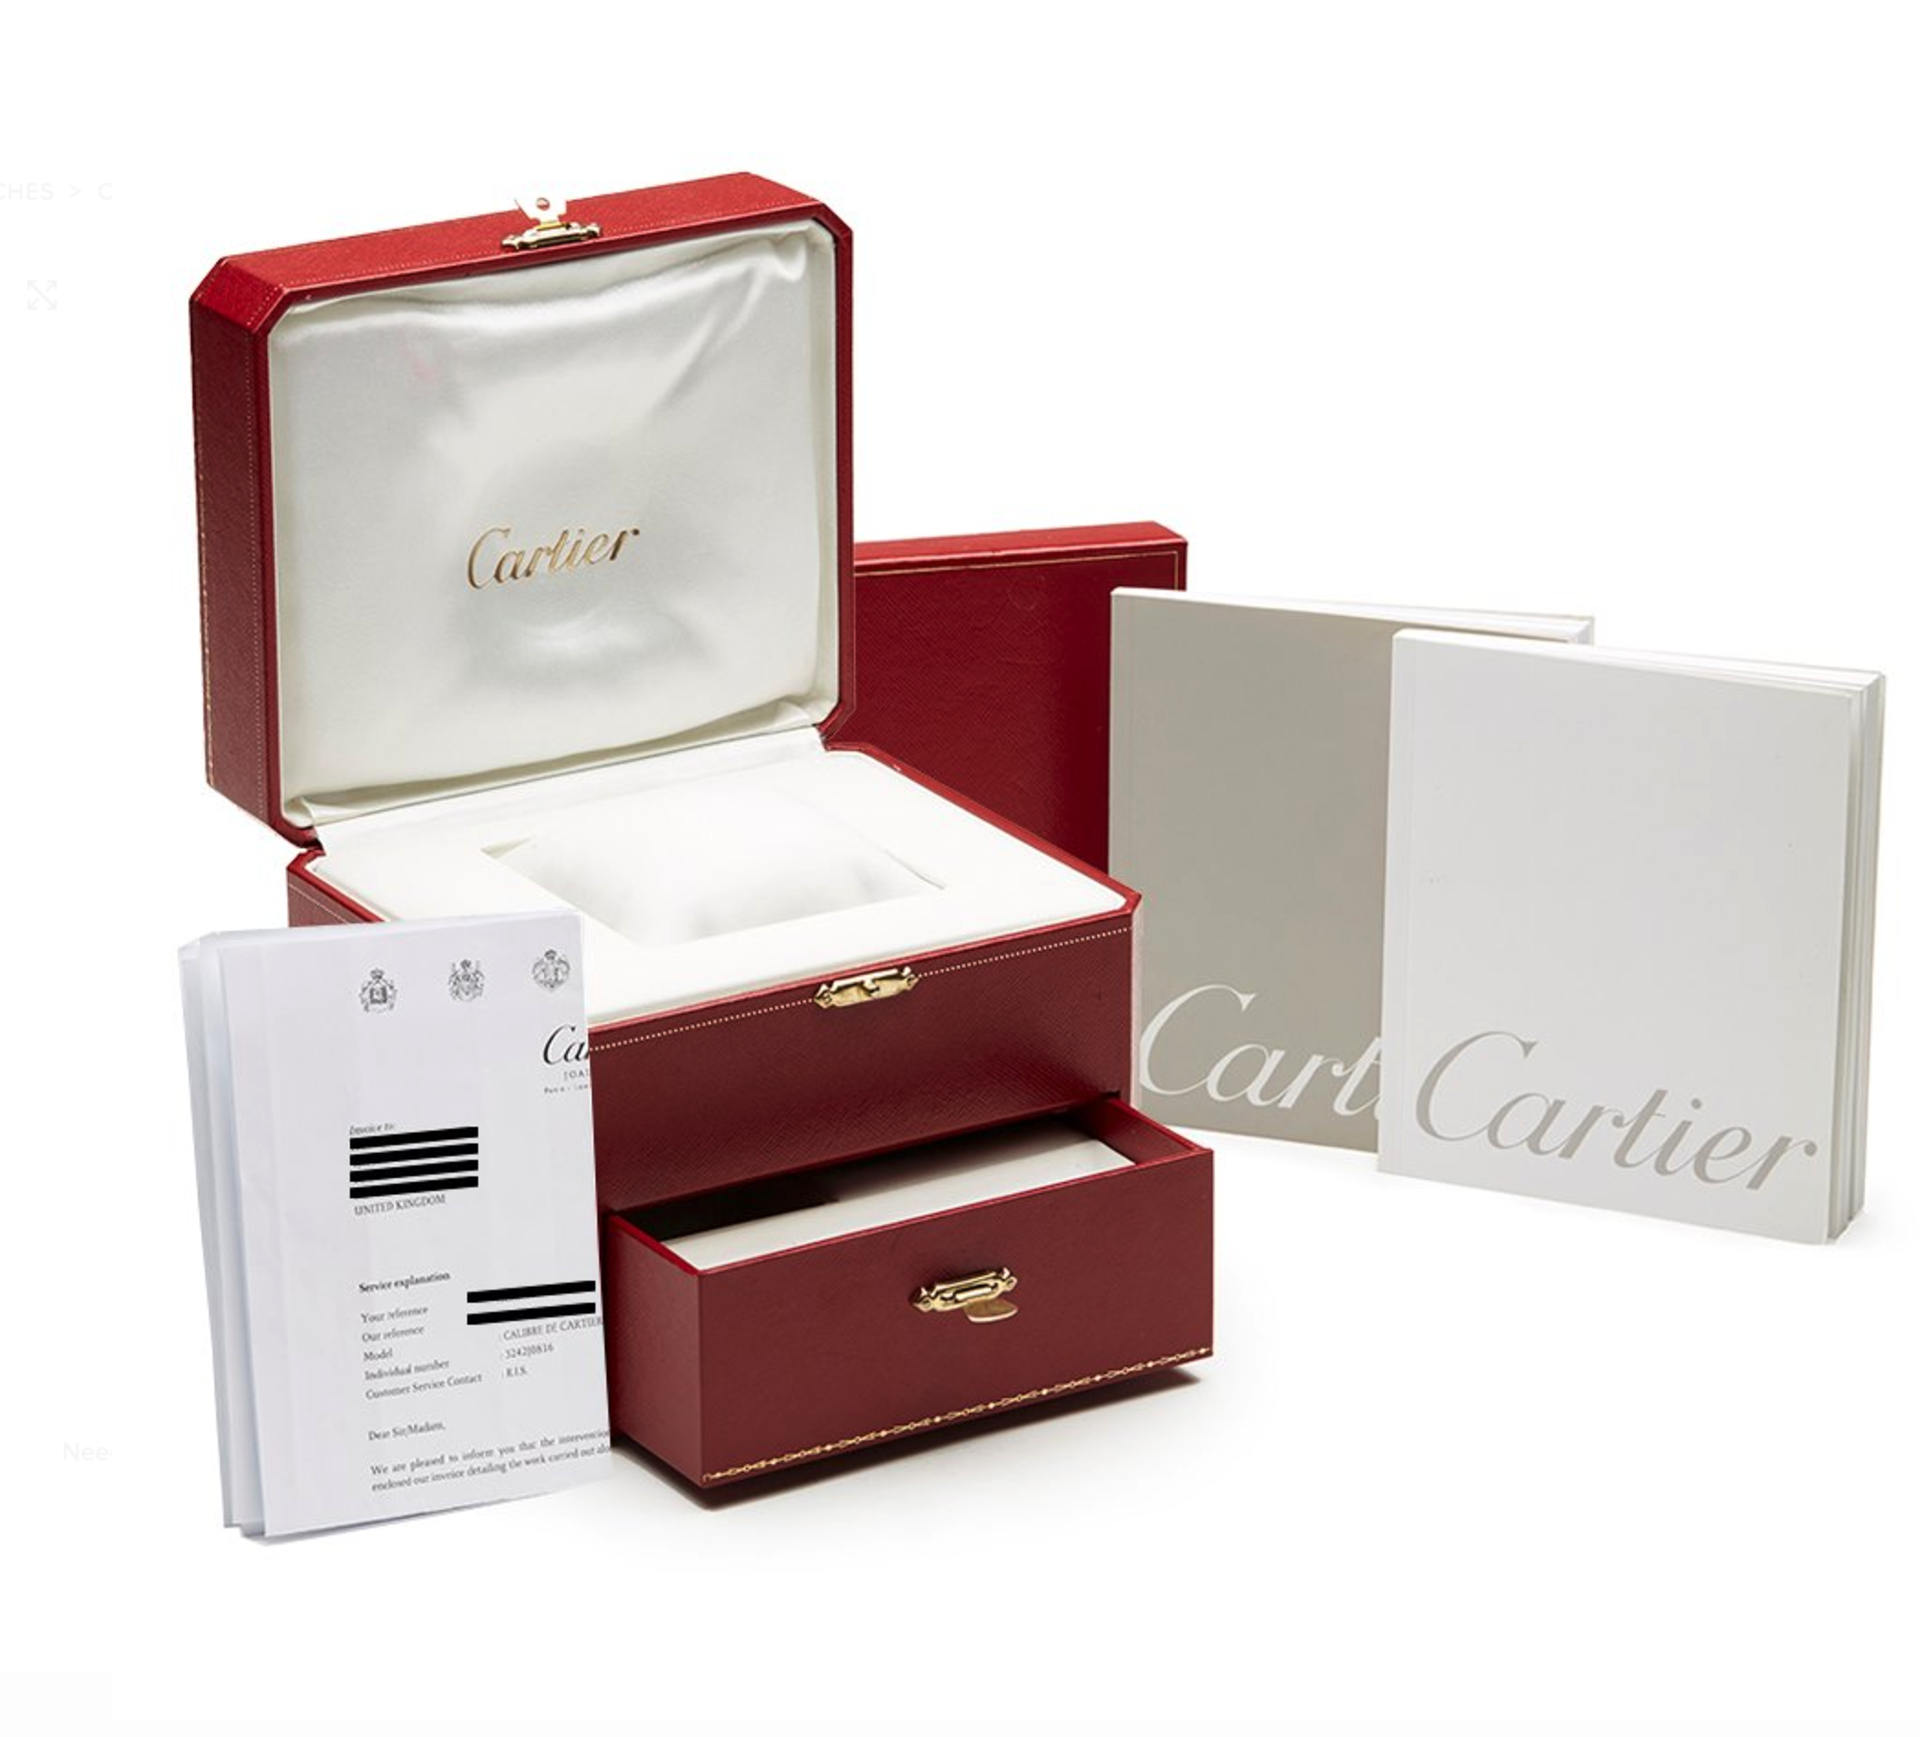 Cartier Calibre Central Chronograph 44mm 18K Rose Gold - 3242 or W7100004 - Image 4 of 9